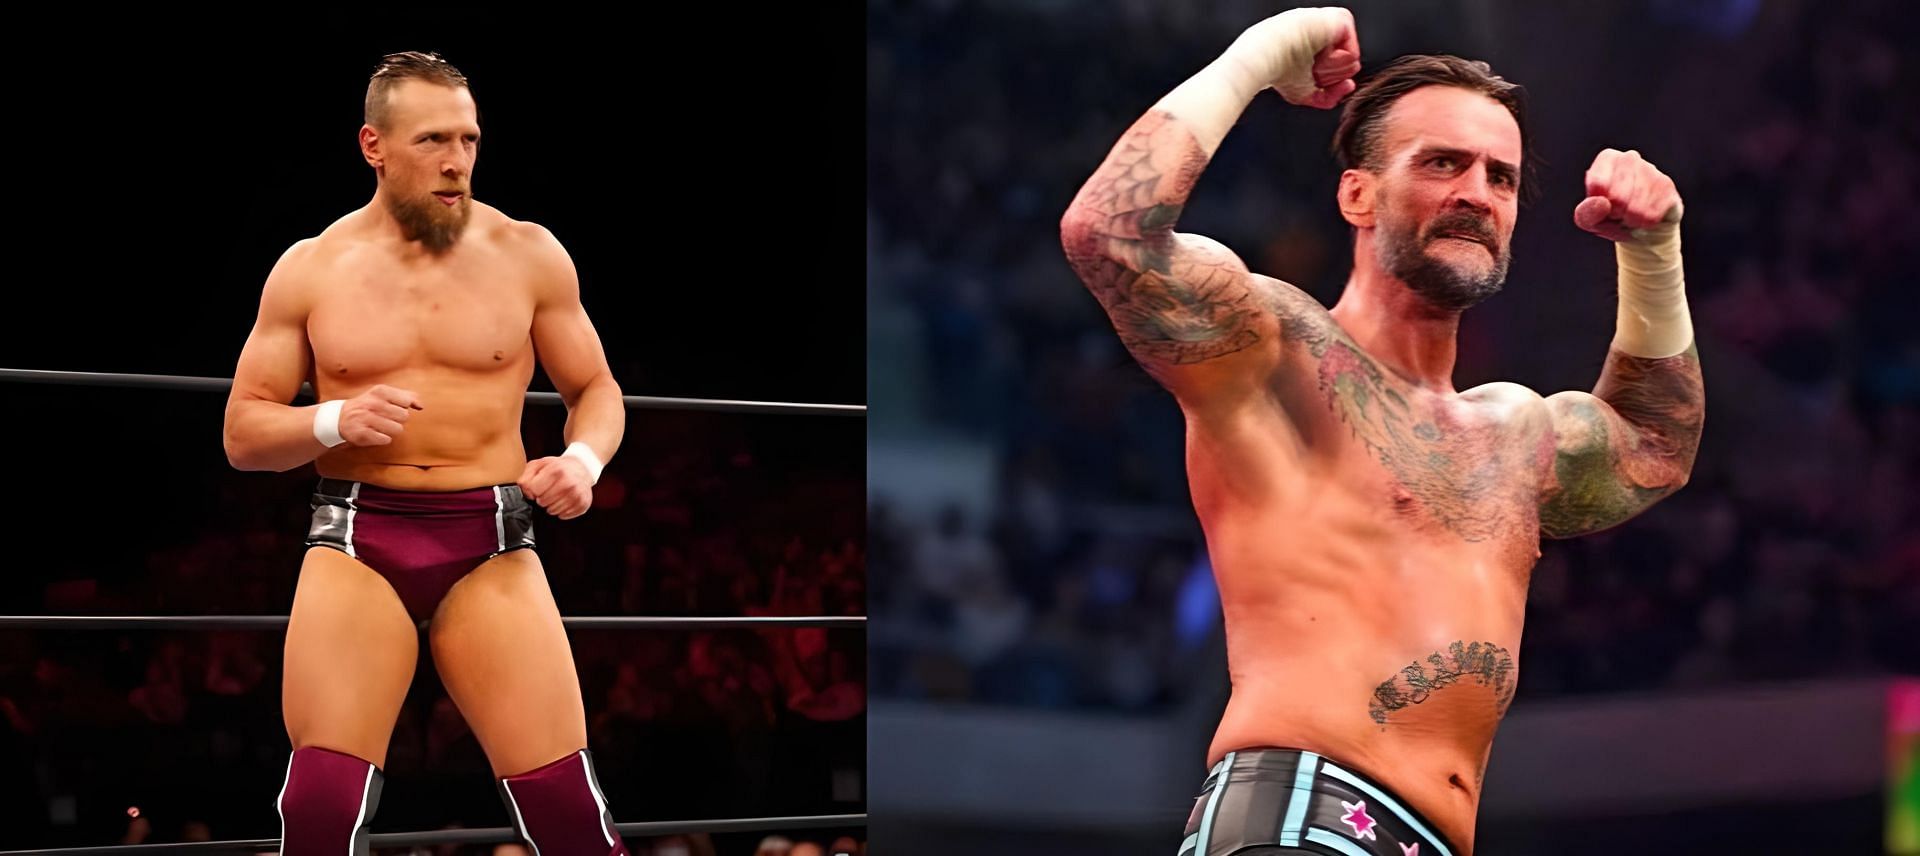 Bryan Danielson(L) and CM Punk(R) have been the trendsetters in utmost sense